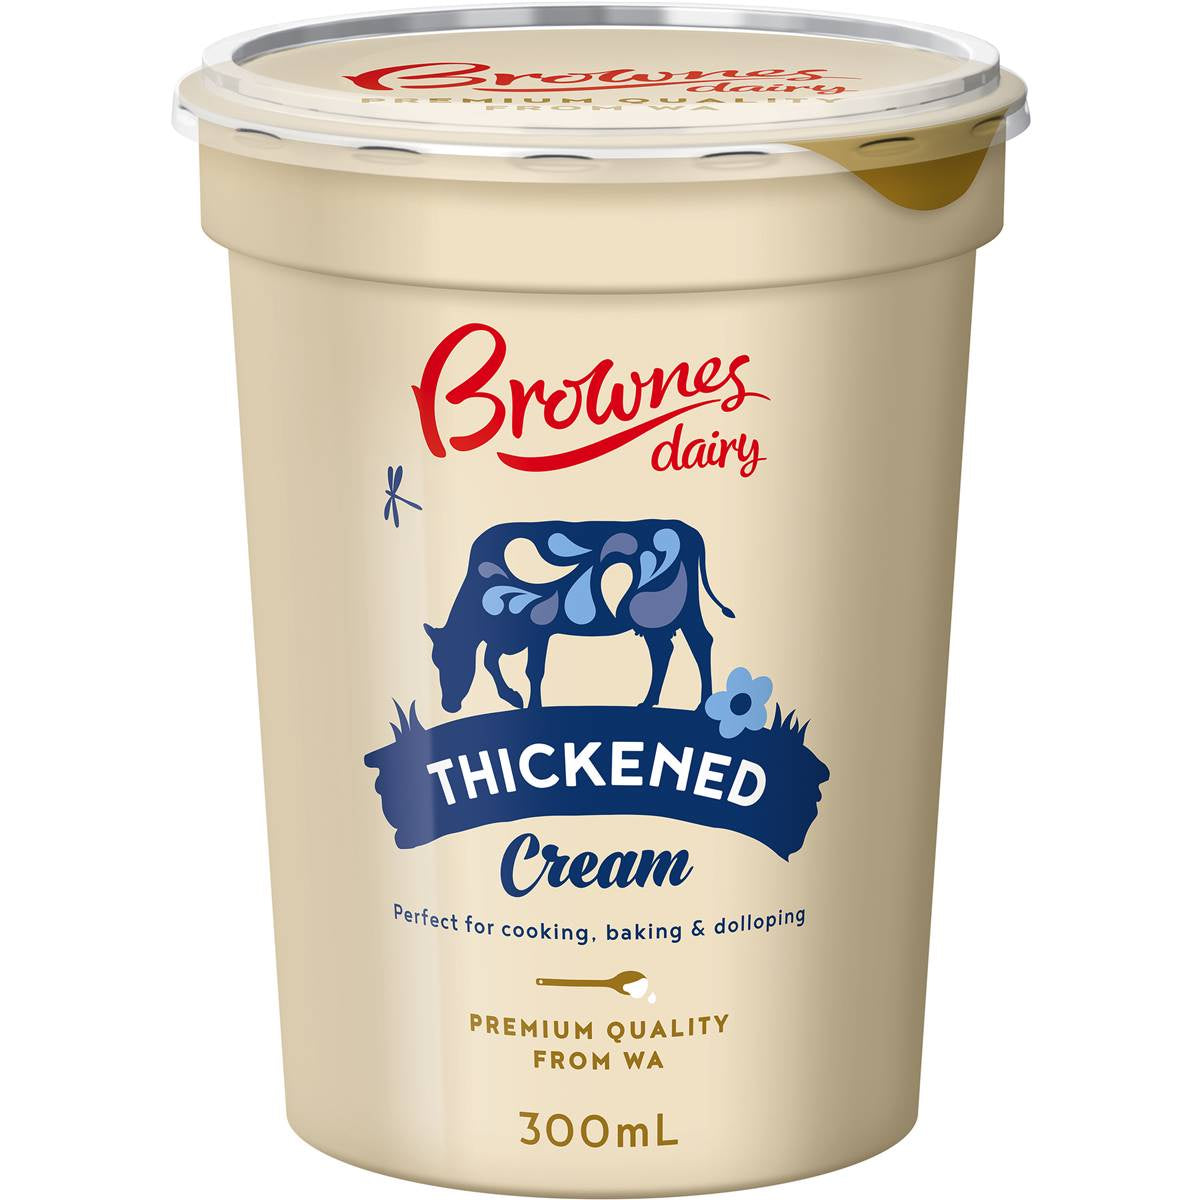 Brownes Thickened Cream 300mL